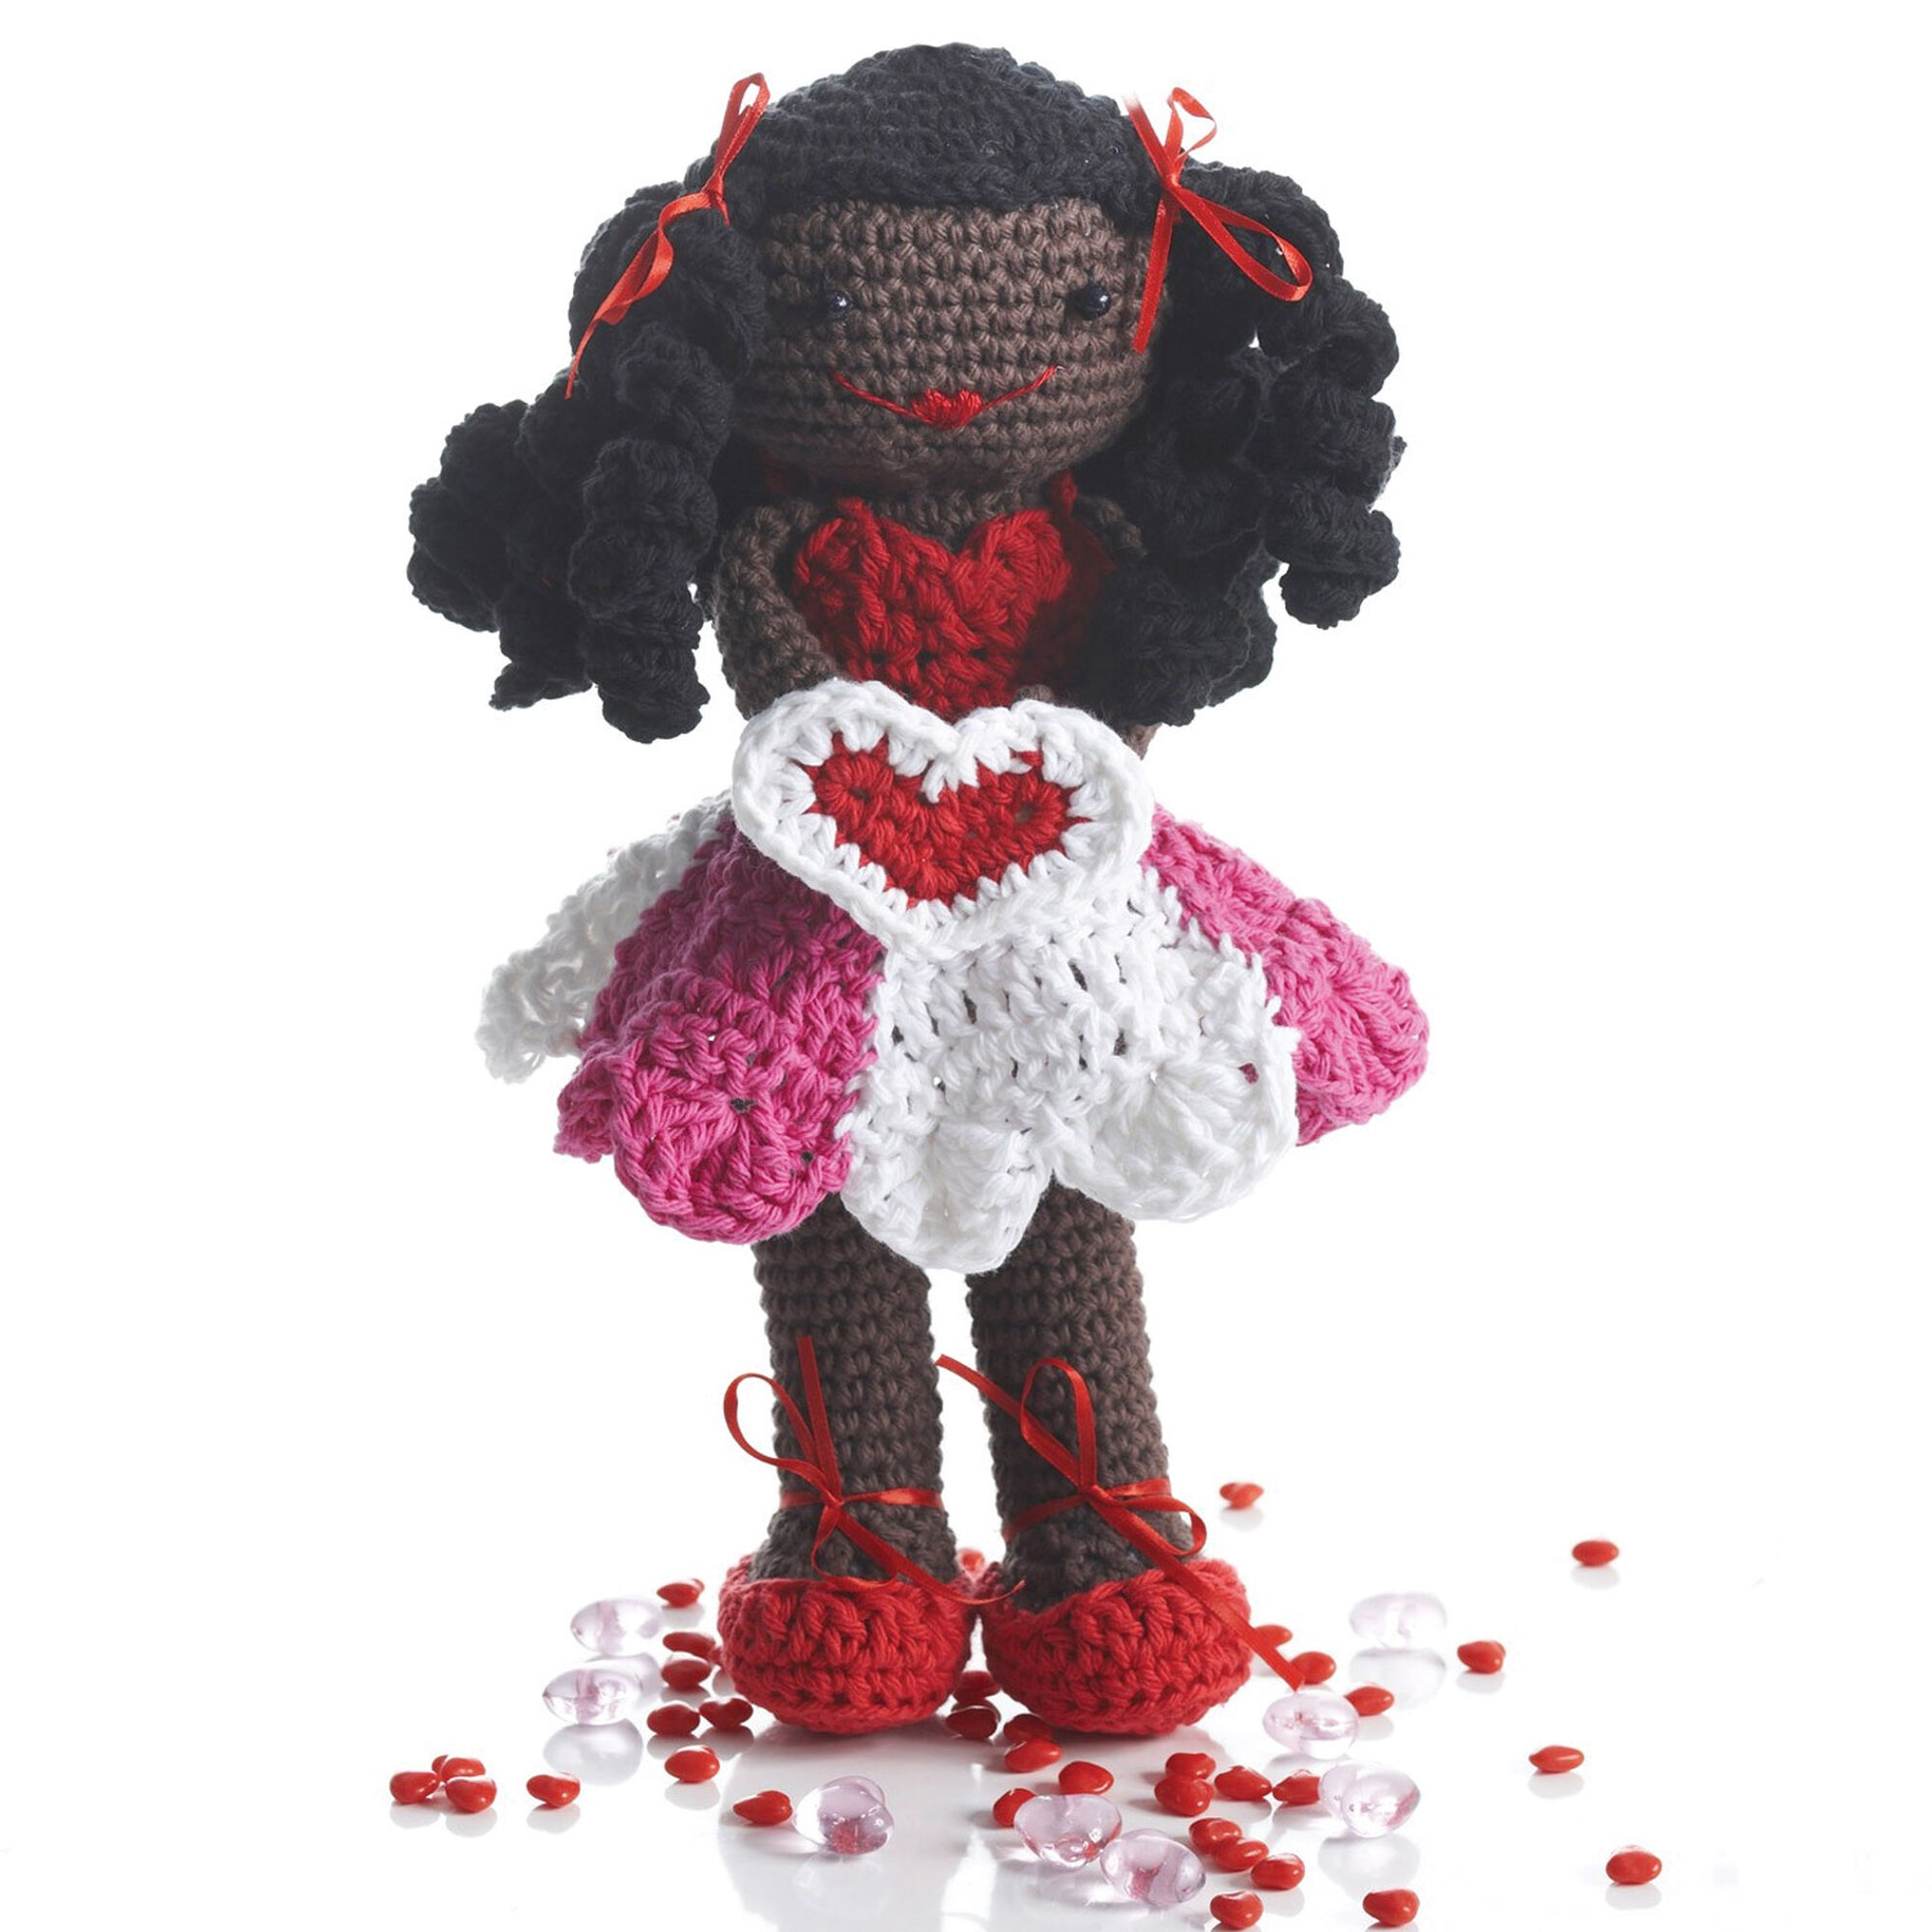 Lily Sugar'n Cream Valentines Lily Doll - One way you can show your love for kids this Valentine’s is by crocheting these simple crochet patterns. #simplecrochetpatterns #crochetpatterns #kidscrochetpatterns